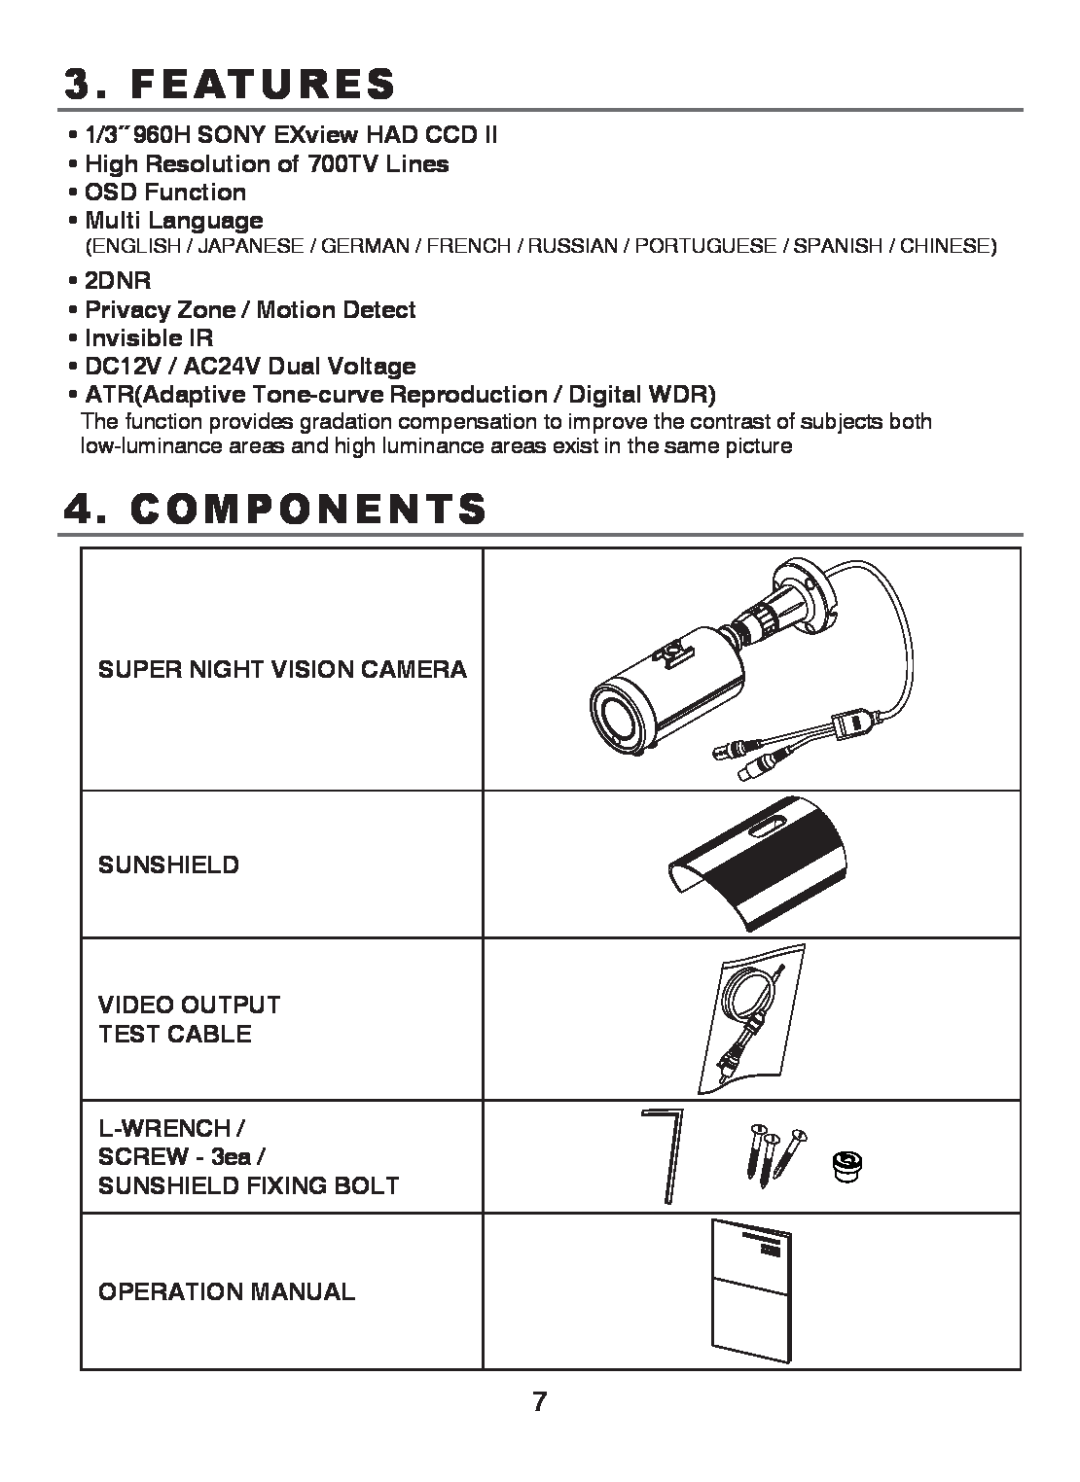 EverFocus M107-N501-001 operation manual Features, Components 